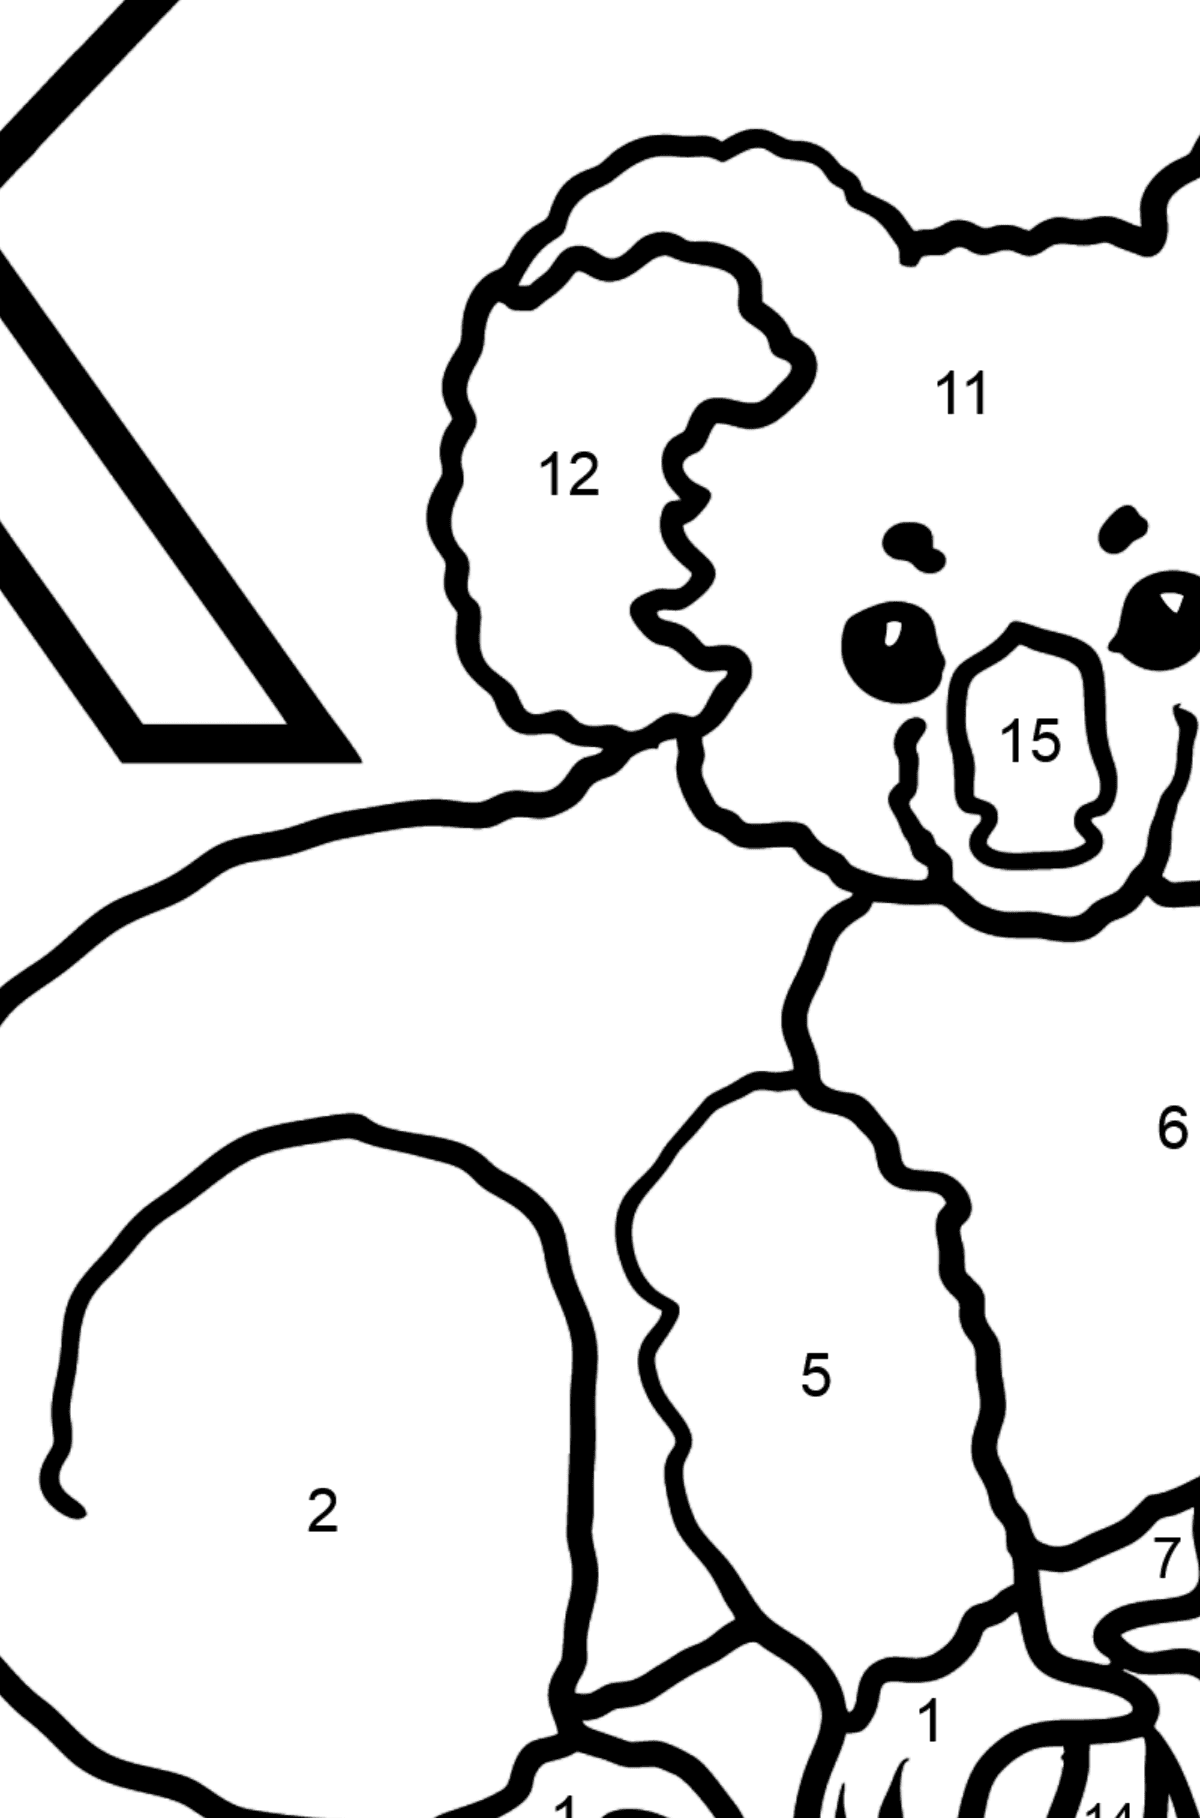 Spanish Letter K coloring pages - KOALA - Coloring by Numbers for Kids